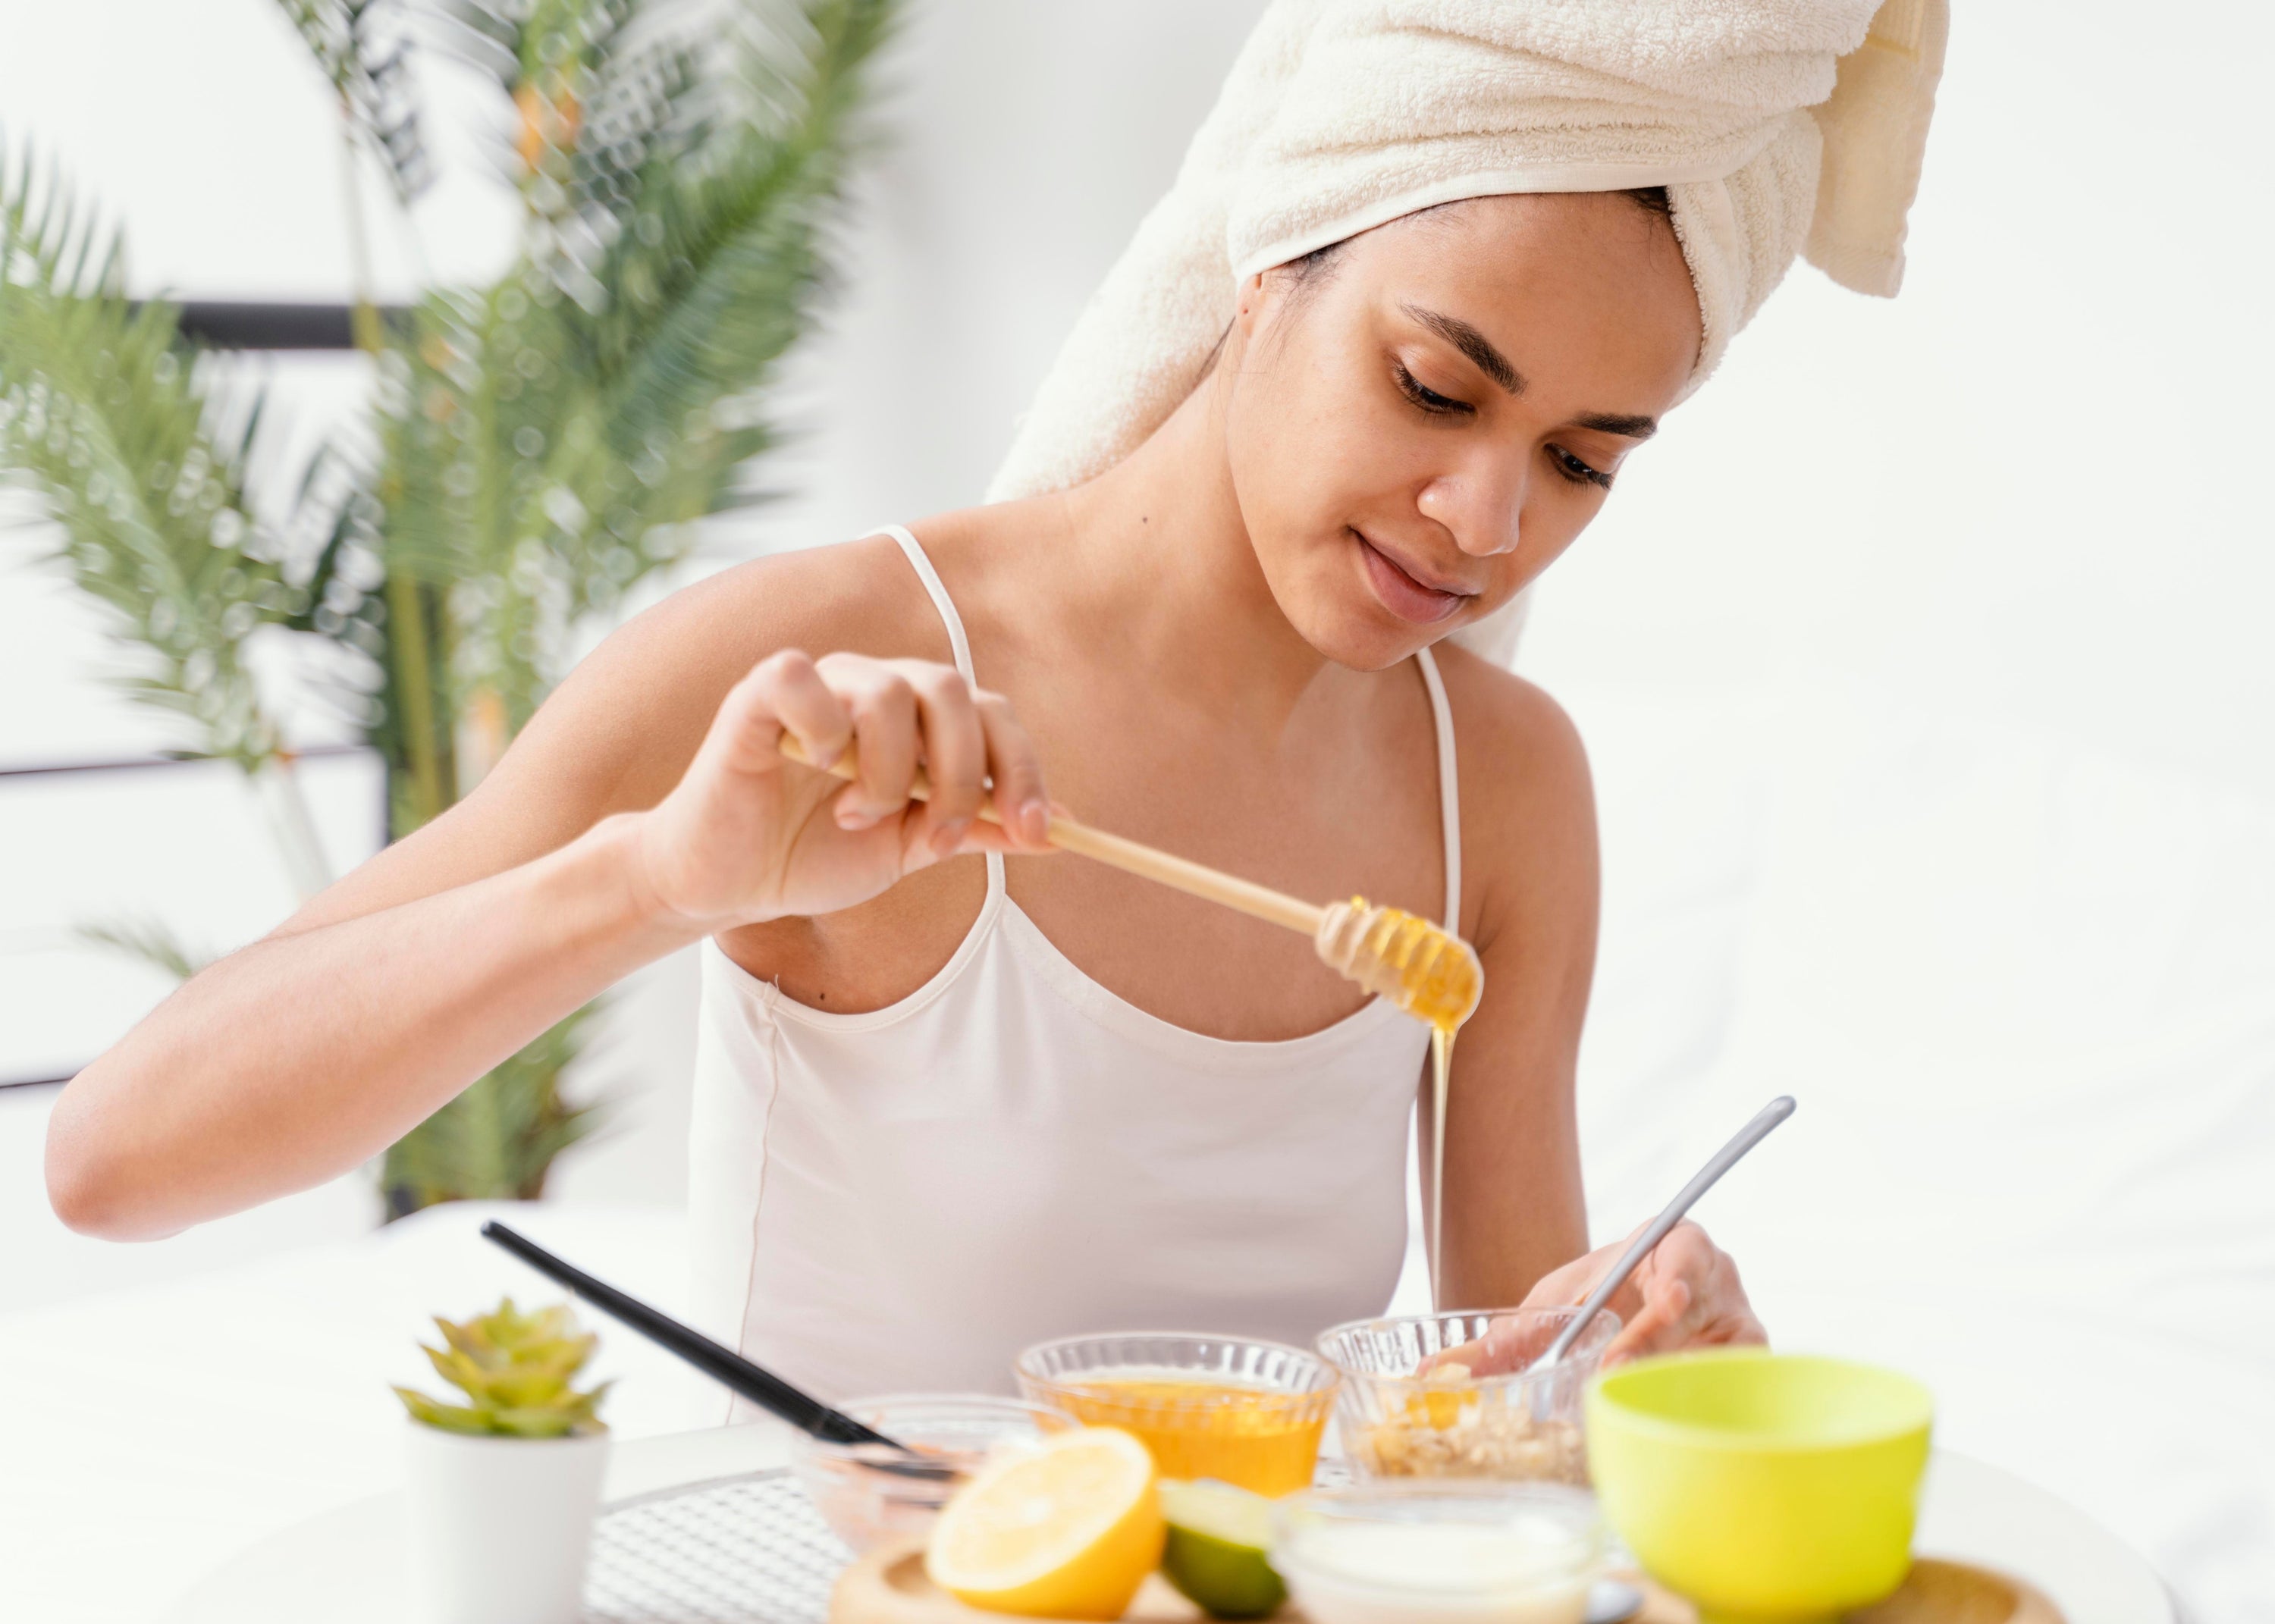 DIY Natural Skincare Recipes for a Healthy Glow